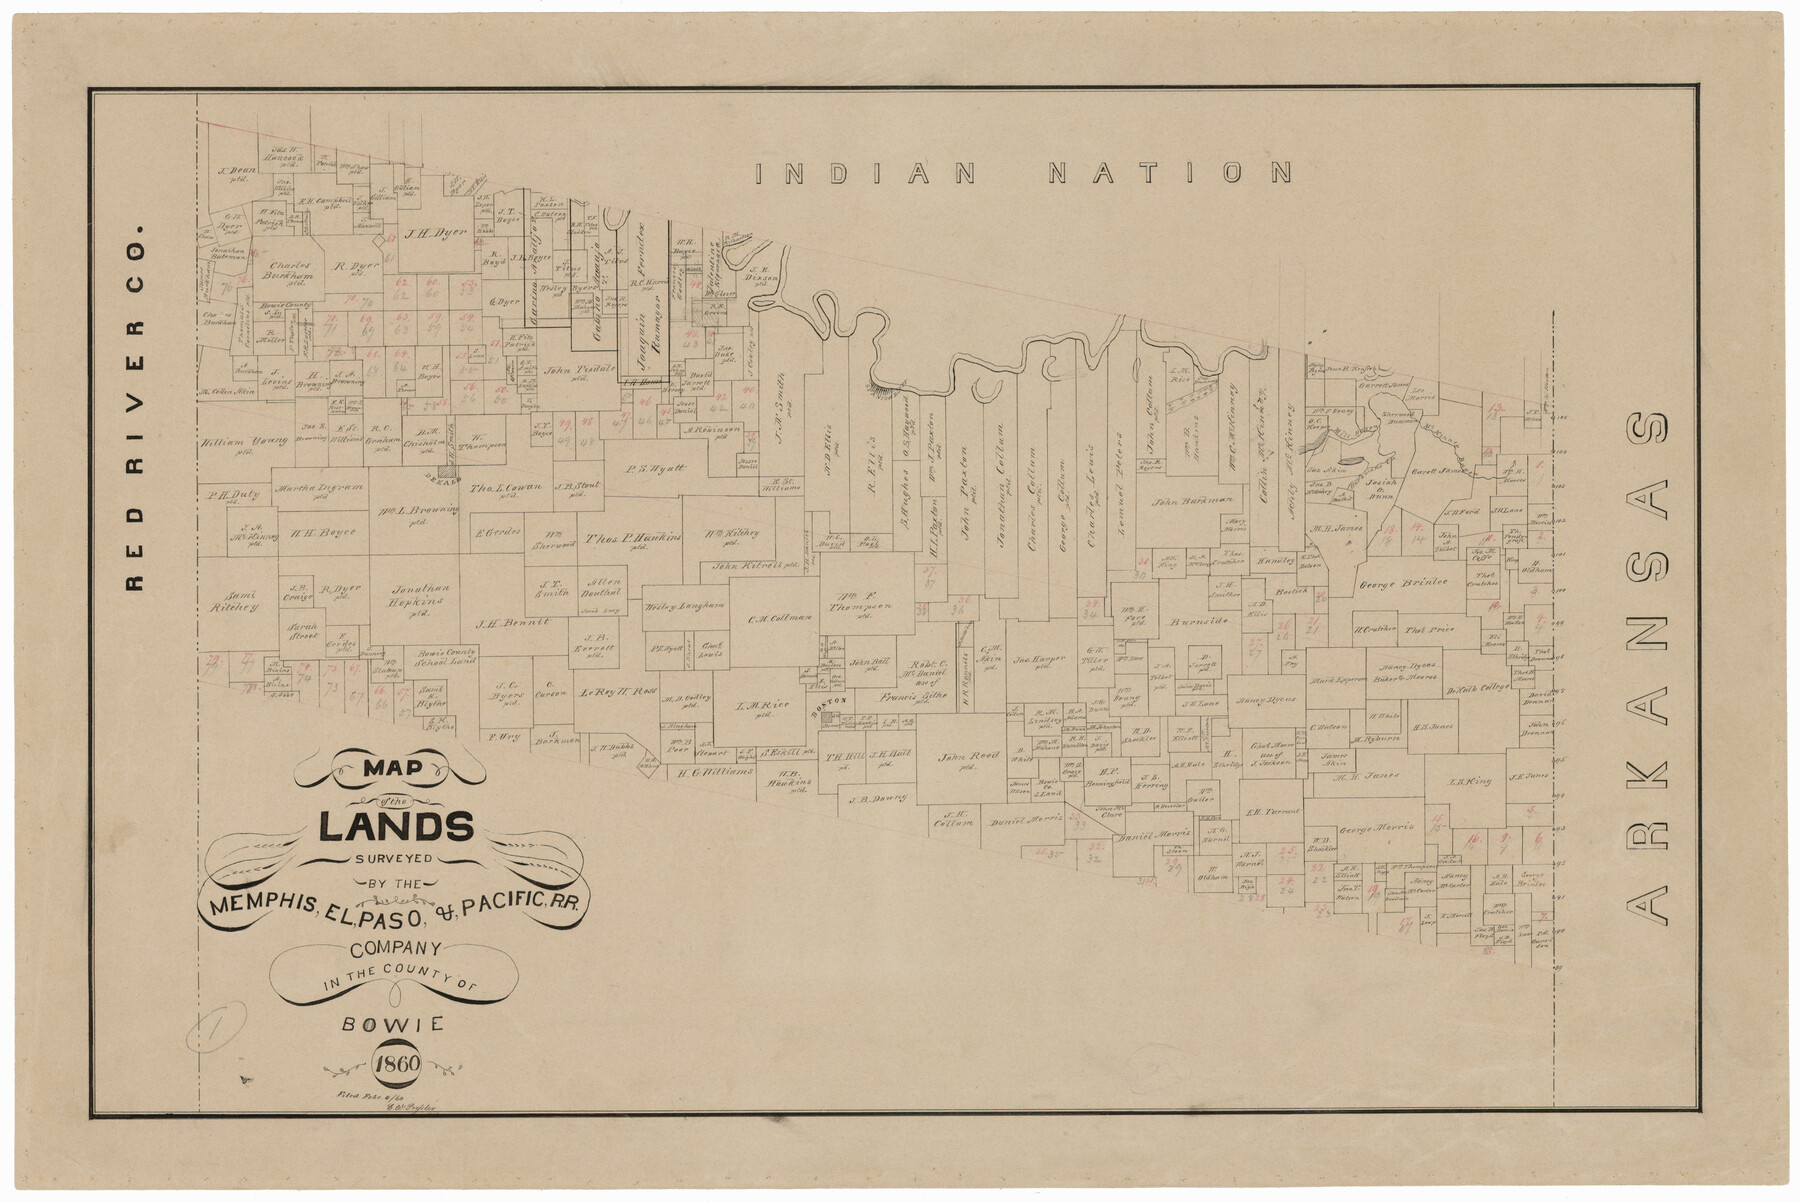 4845, Map of the Lands Surveyed by the Memphis, El Paso & Pacific R.R. Company, General Map Collection